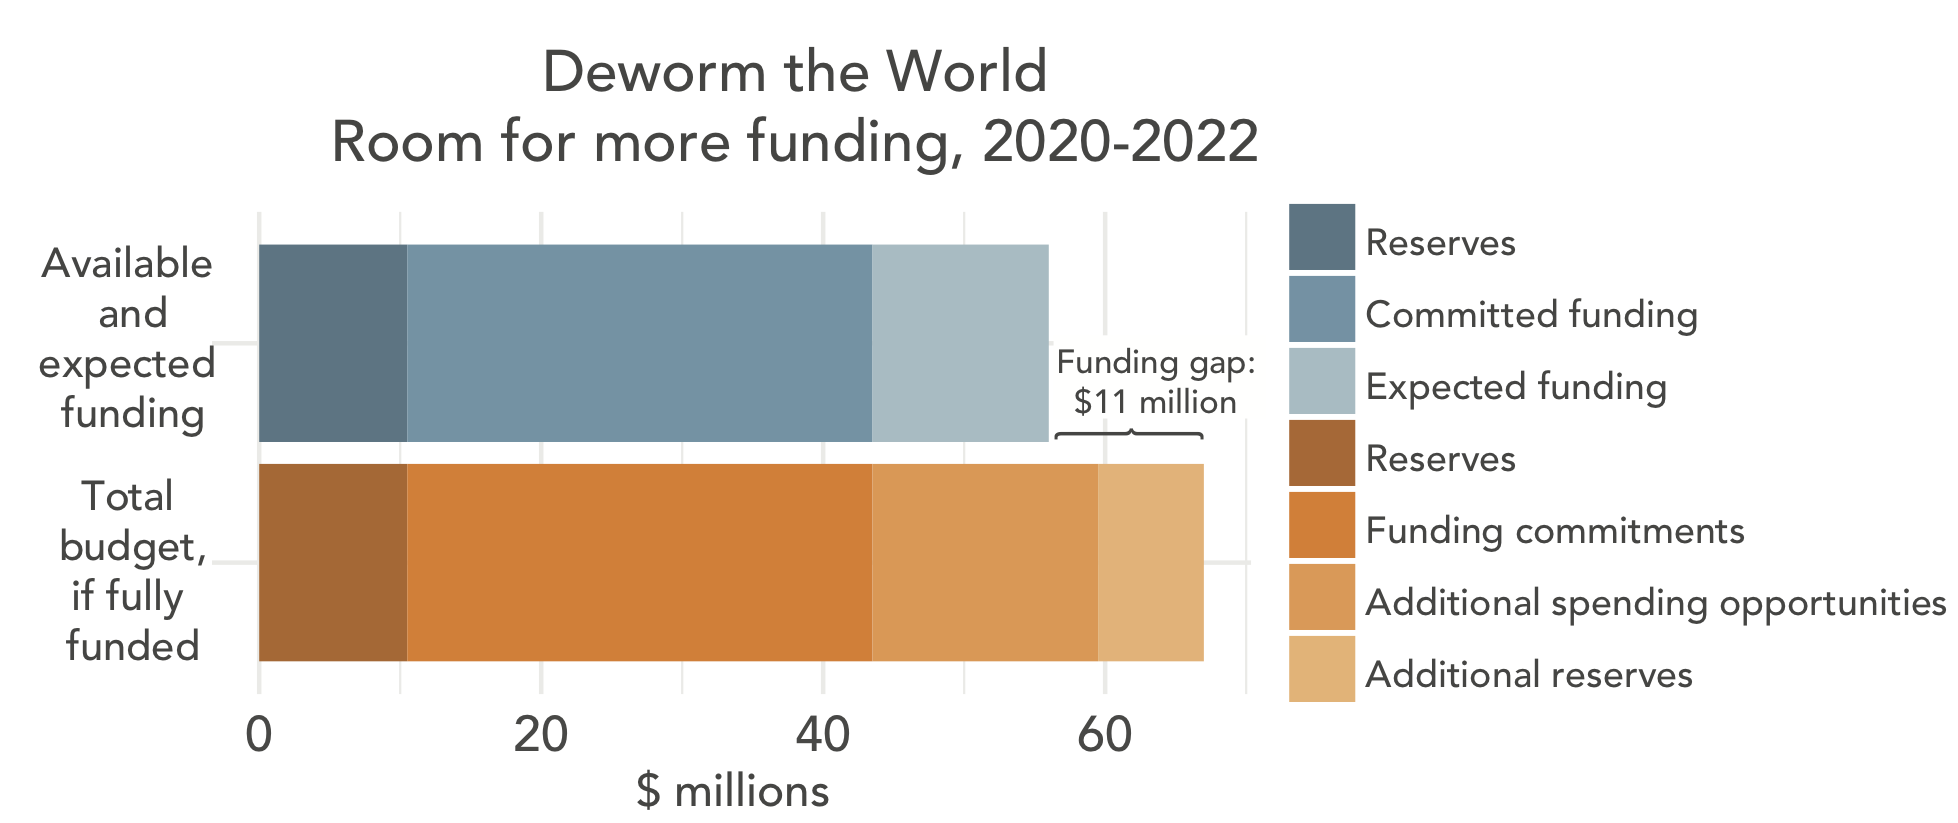 Room for more funding for Deworm the World 2020-2022